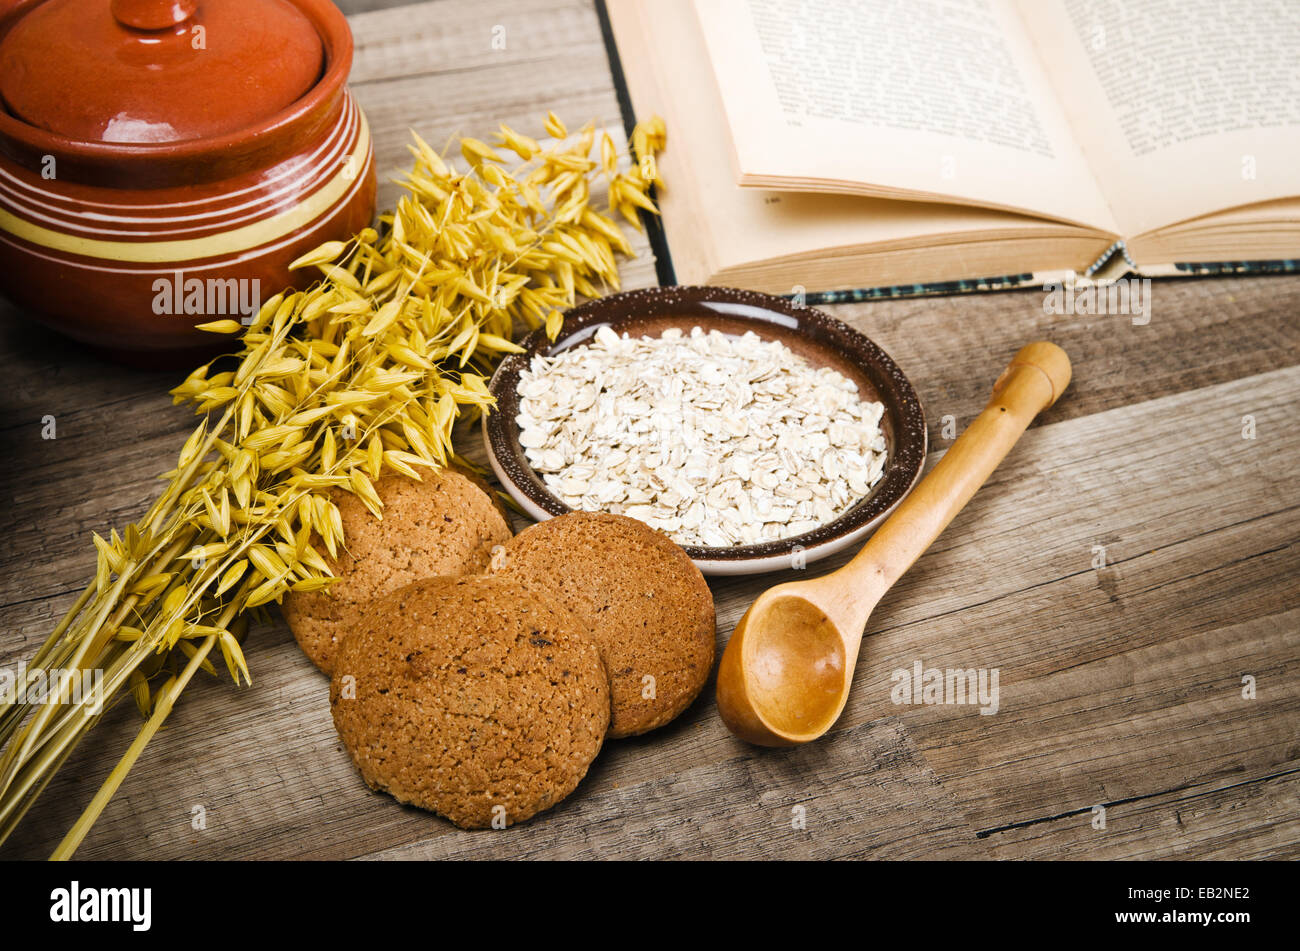 Oatmeal cookies, open book of recipes and cooking utensils Stock Photo